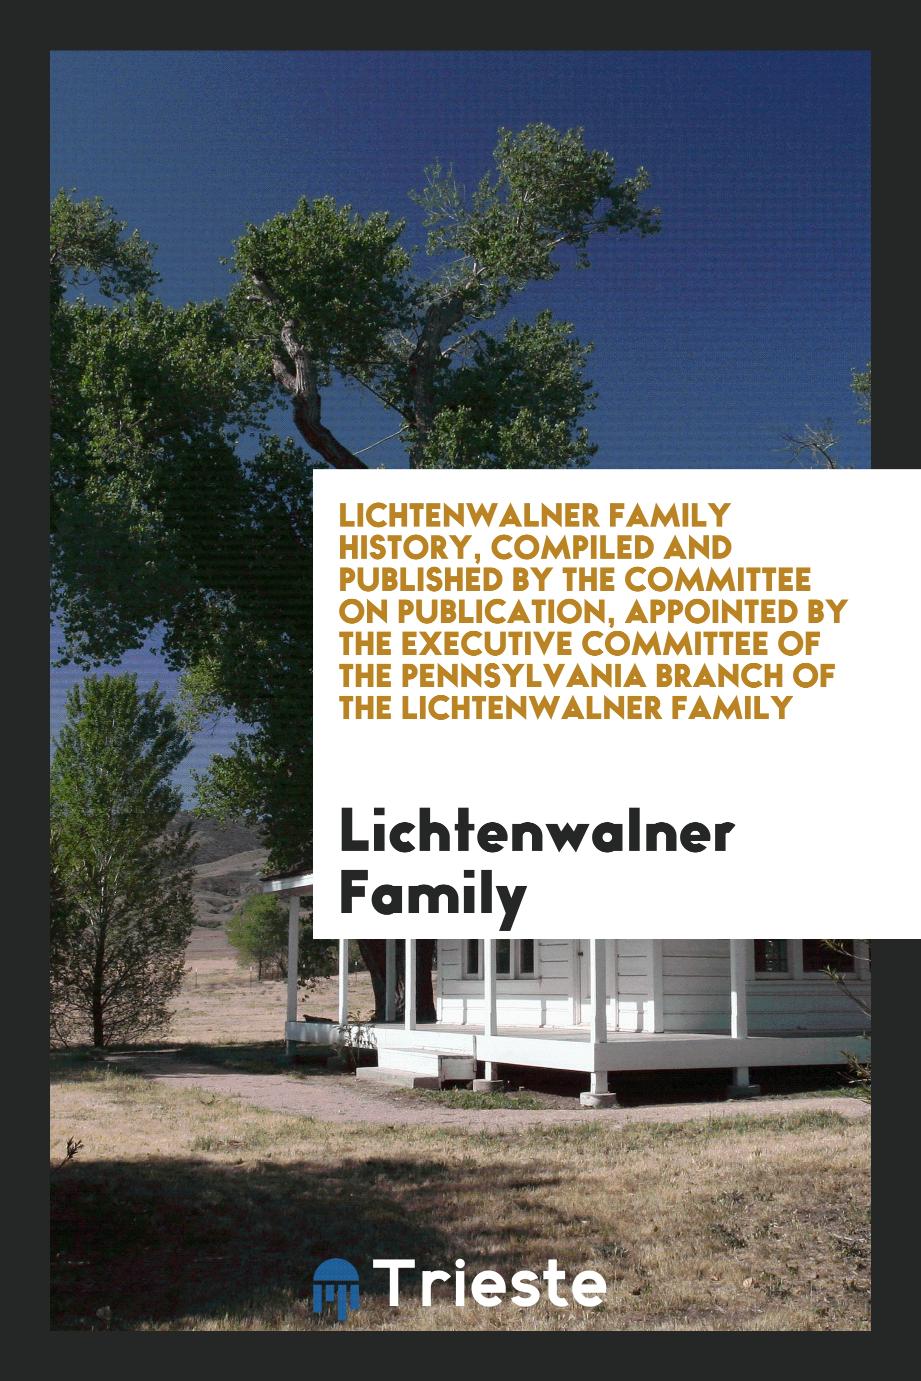 Lichtenwalner Family History, Compiled and Published by the Committee on Publication, Appointed by the Executive Committee of the Pennsylvania Branch of the Lichtenwalner Family